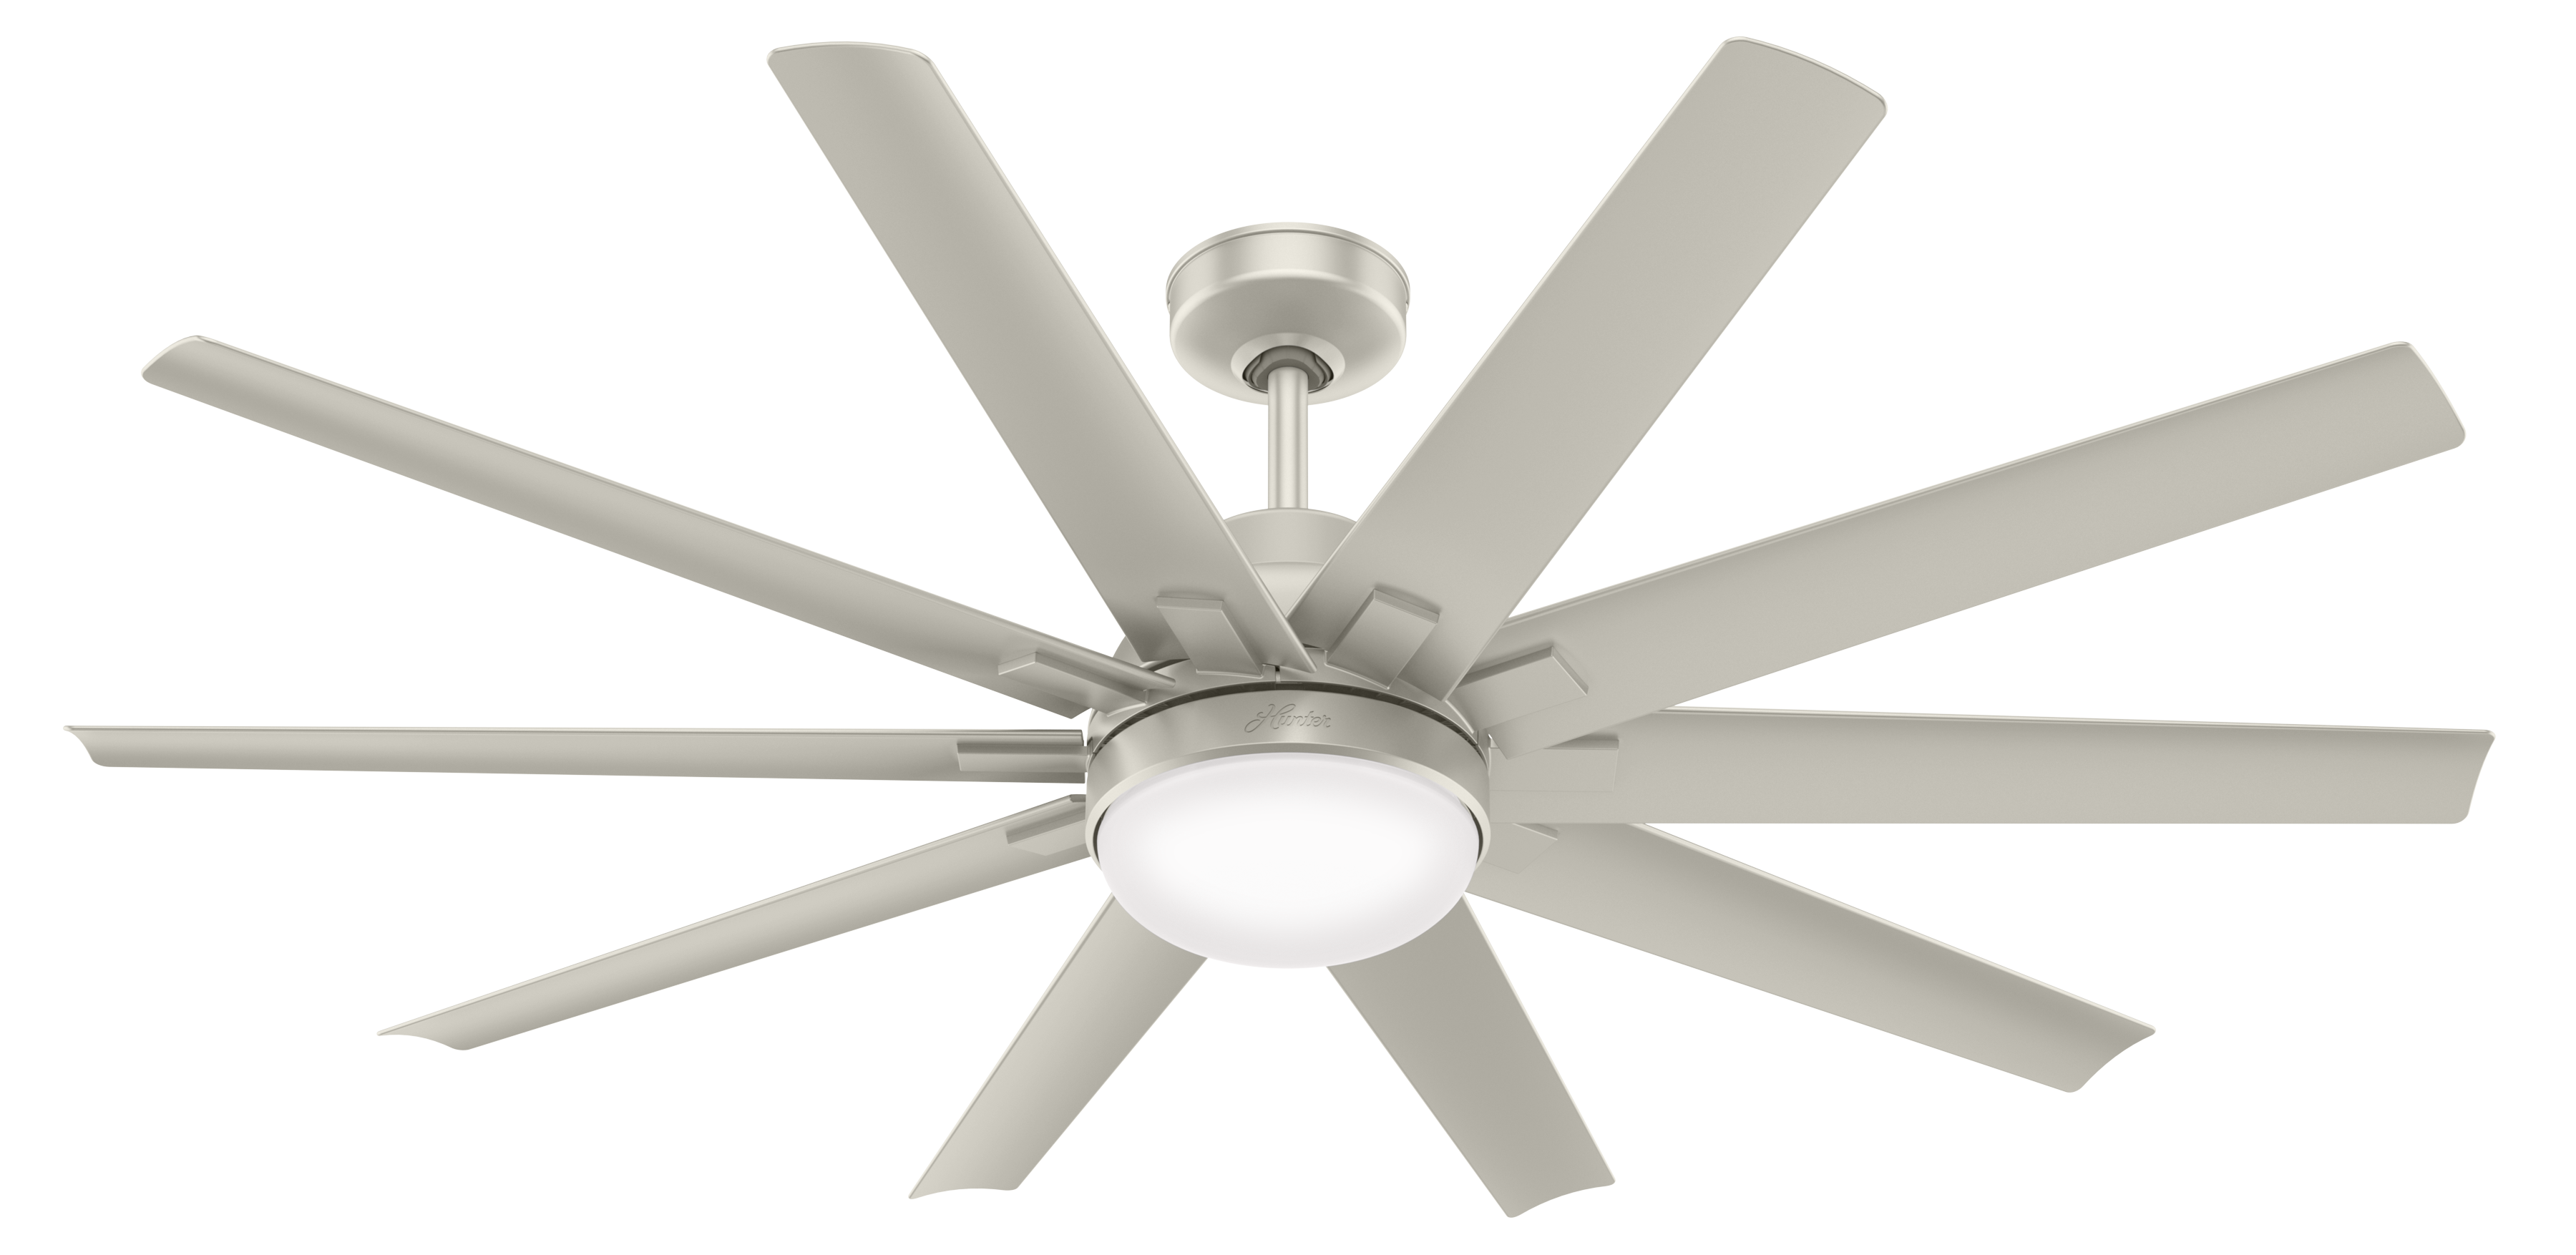 Hunter Fans 50719 Overton with LED Light 60 inch Cailing Fan in Matte Nickel